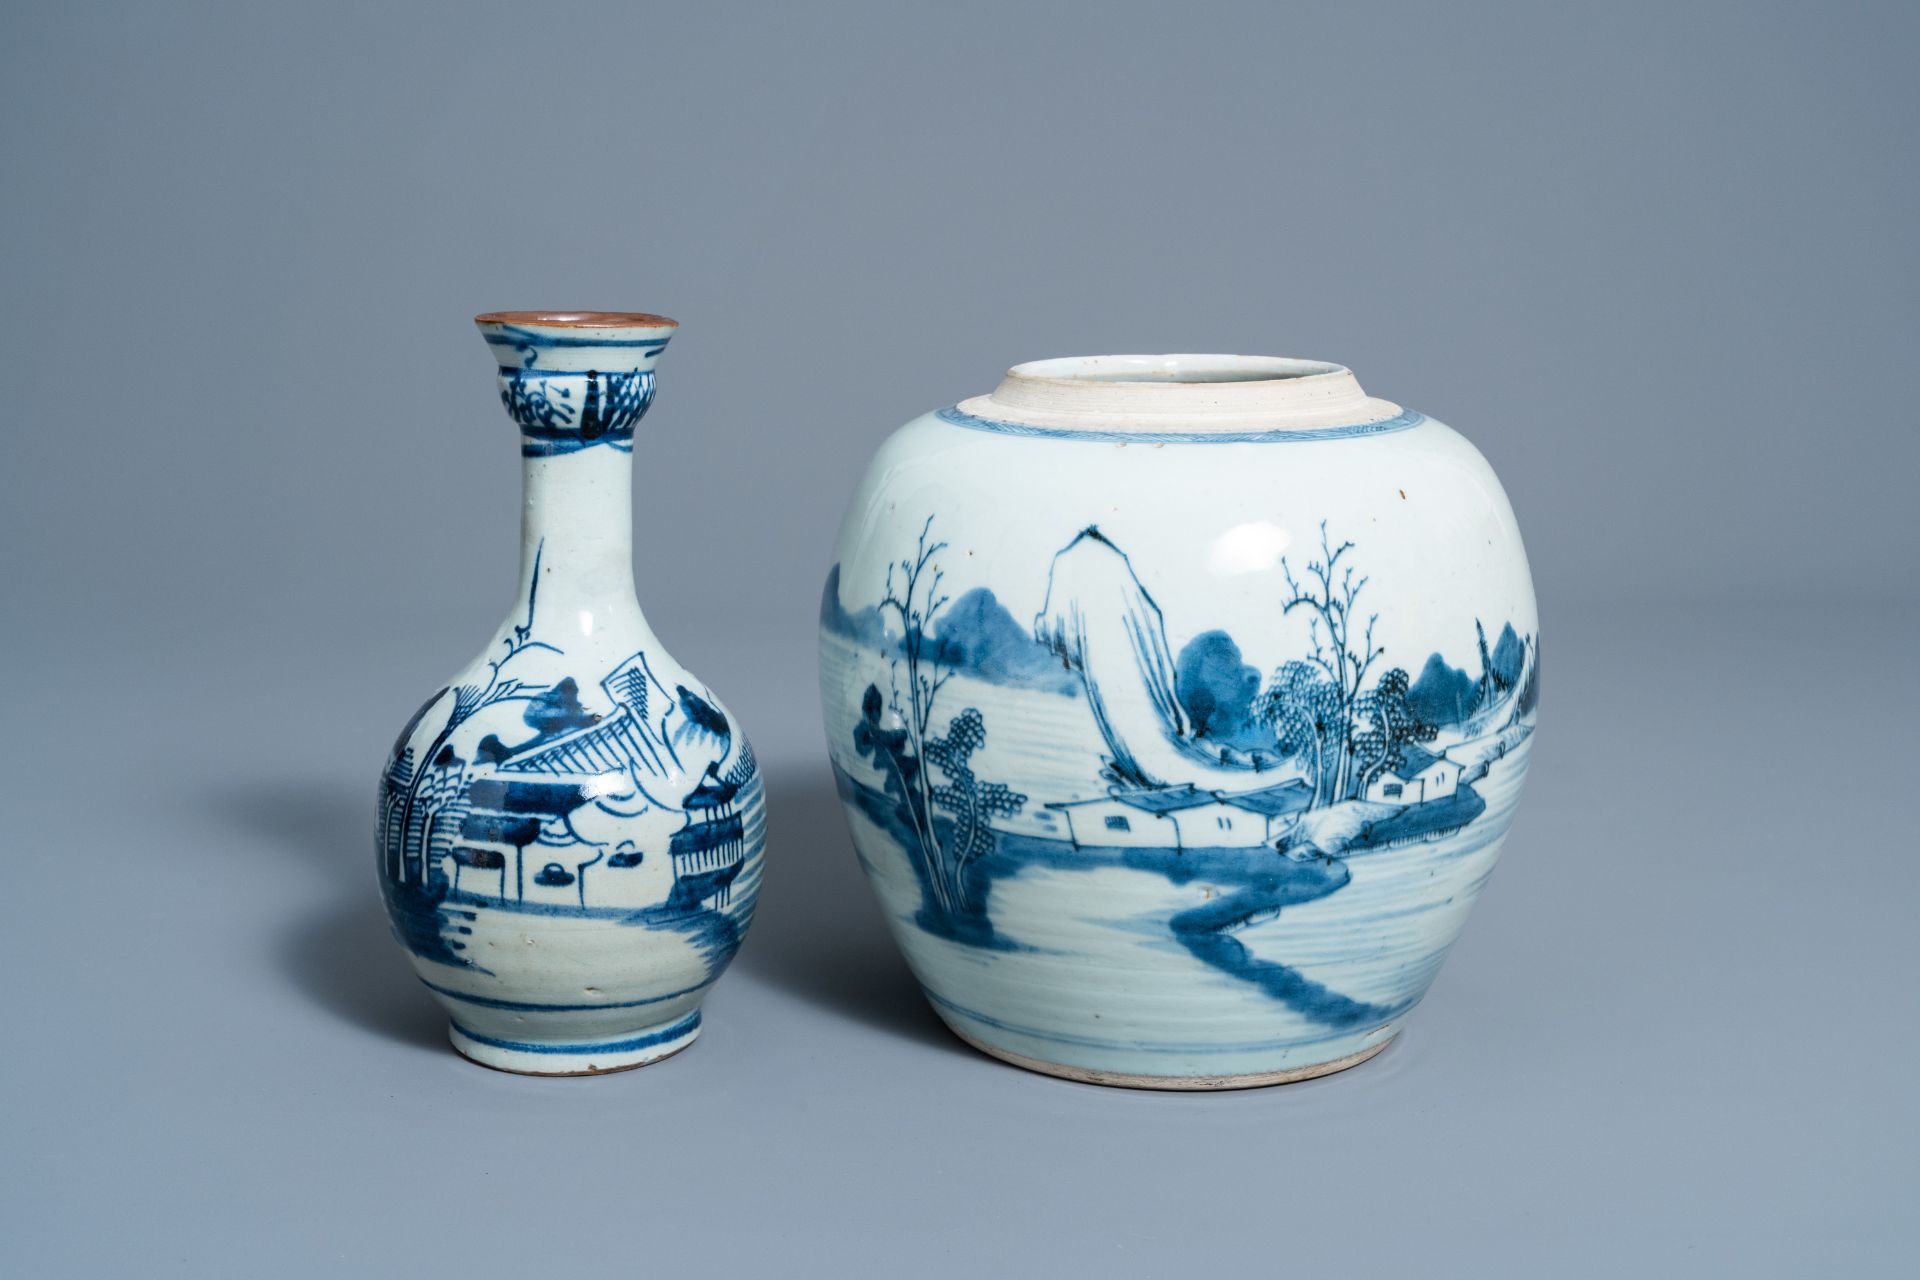 A Chinese blue and white ginger jar and a vase with a river landscape, 19th C.